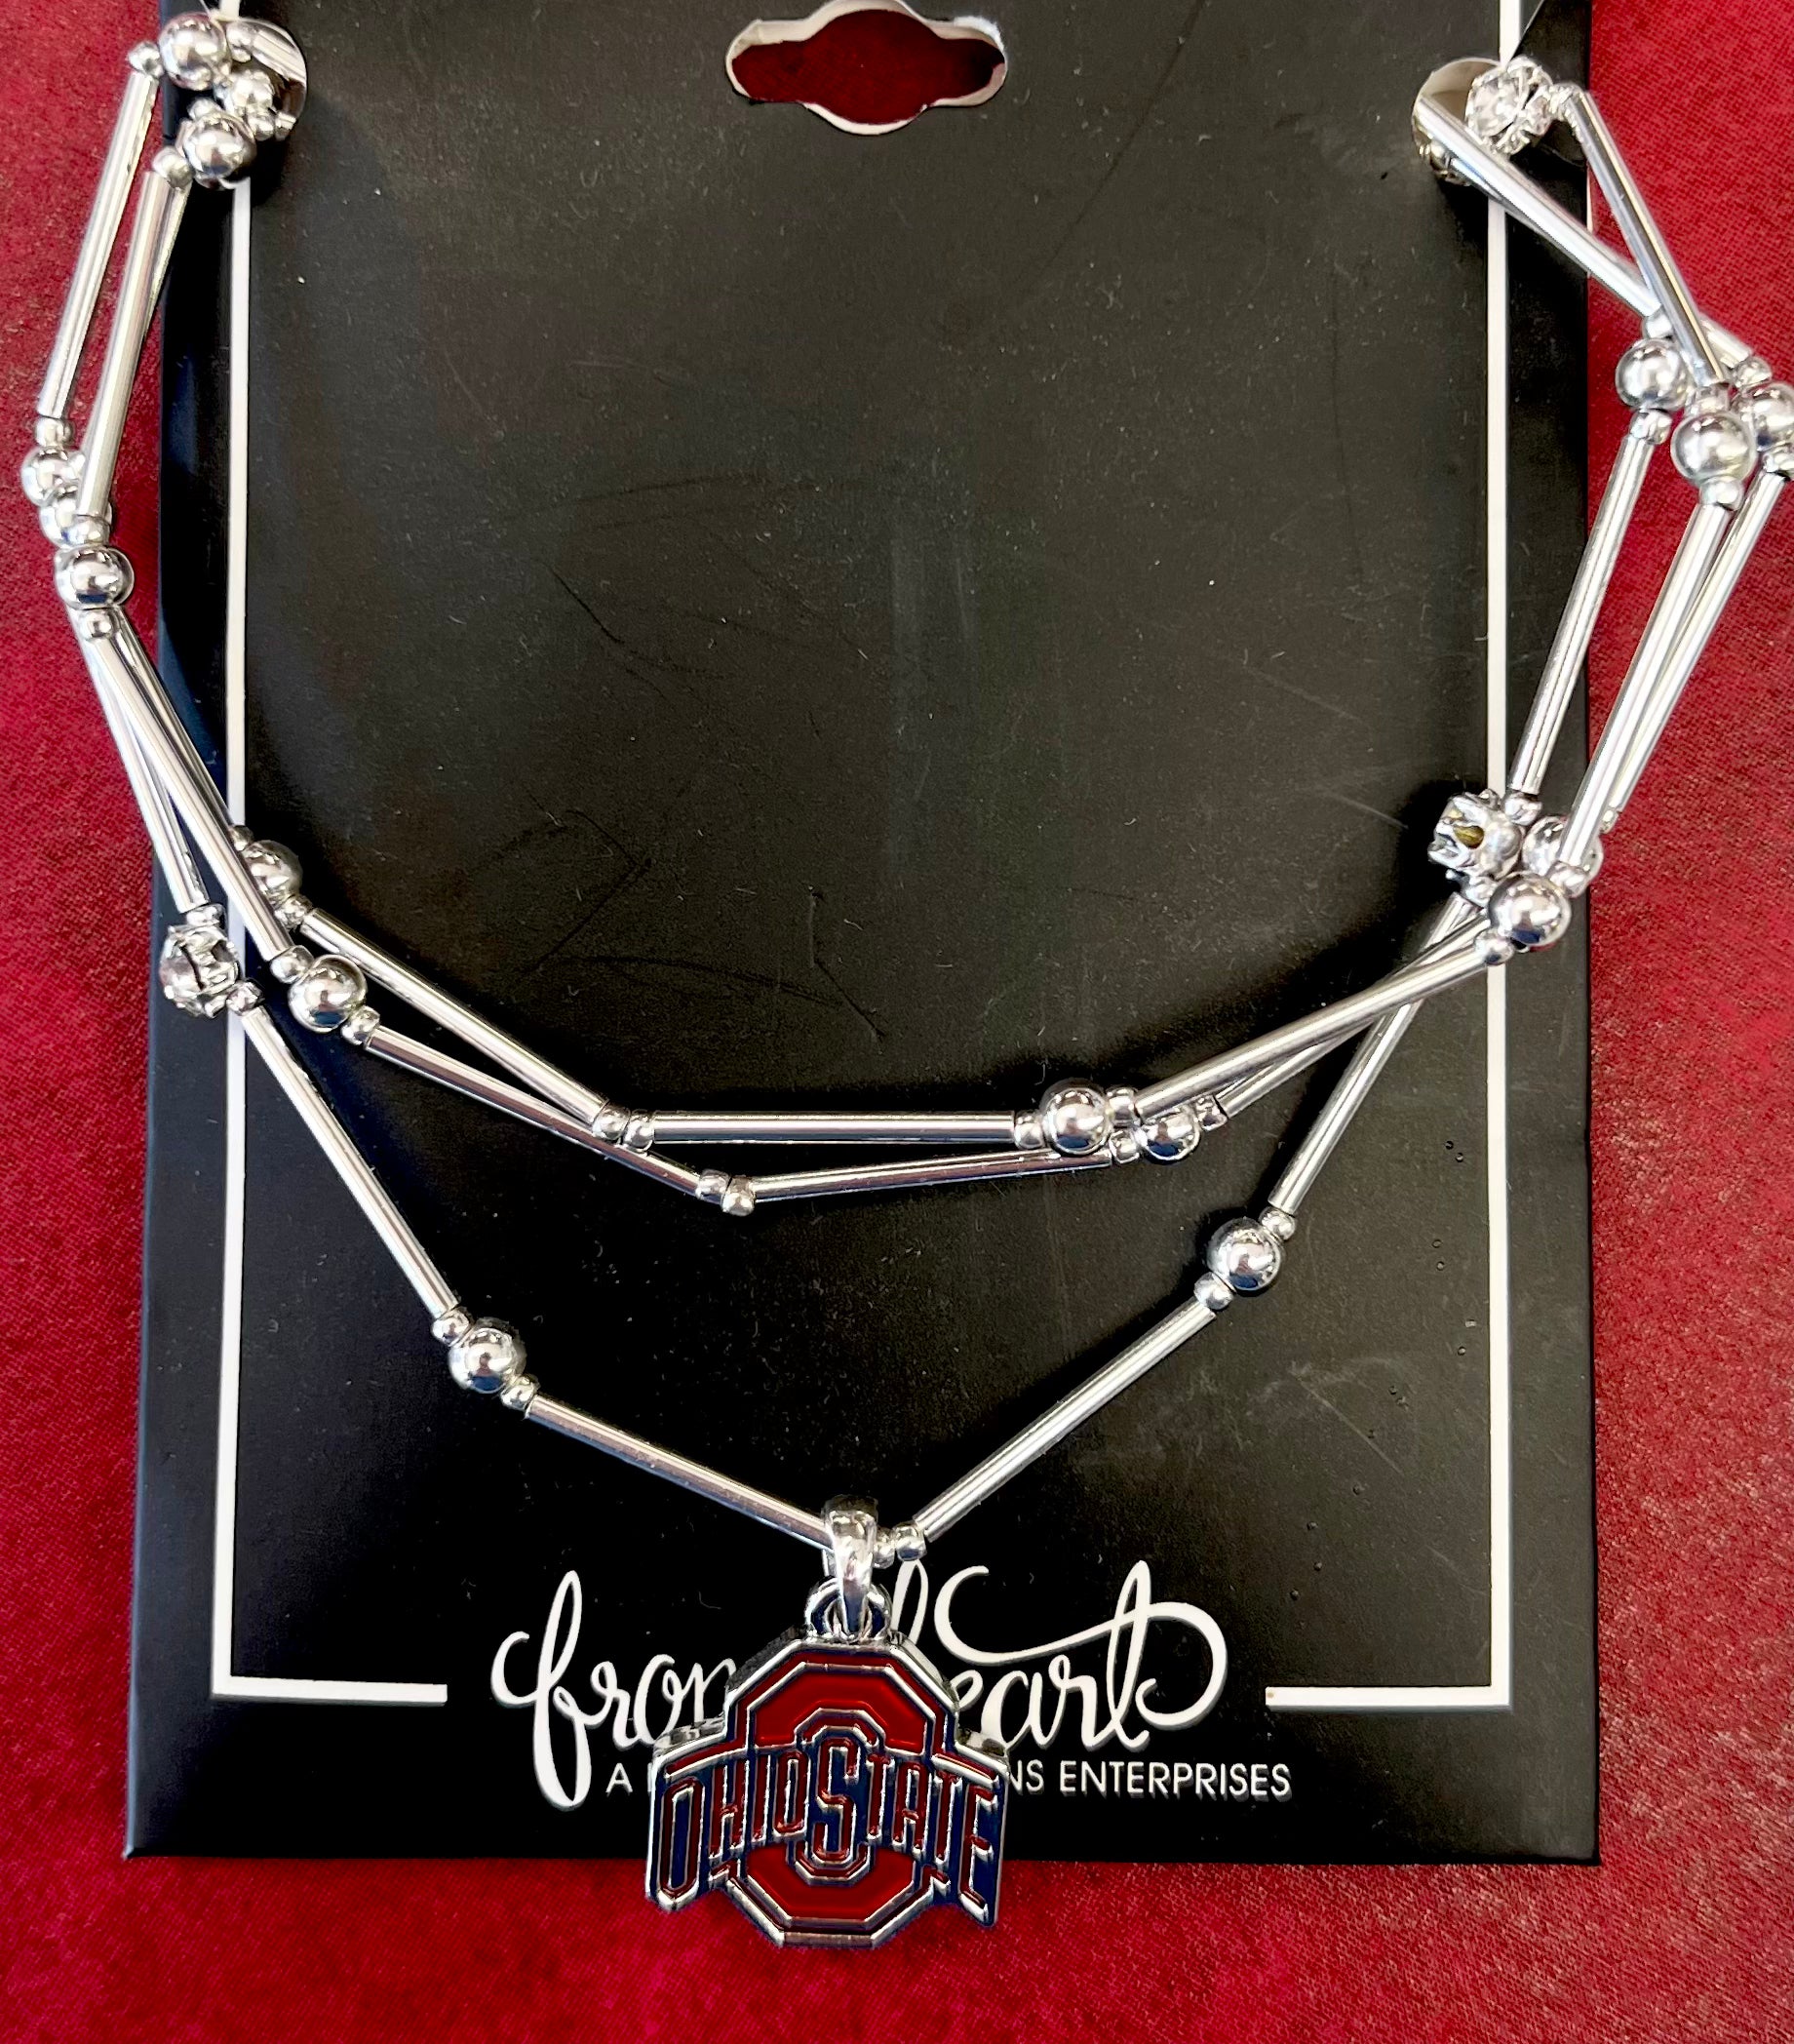 OHIO STATE 3 STRAND NECKLACE WITH ATHLETIC LOGO CHARM